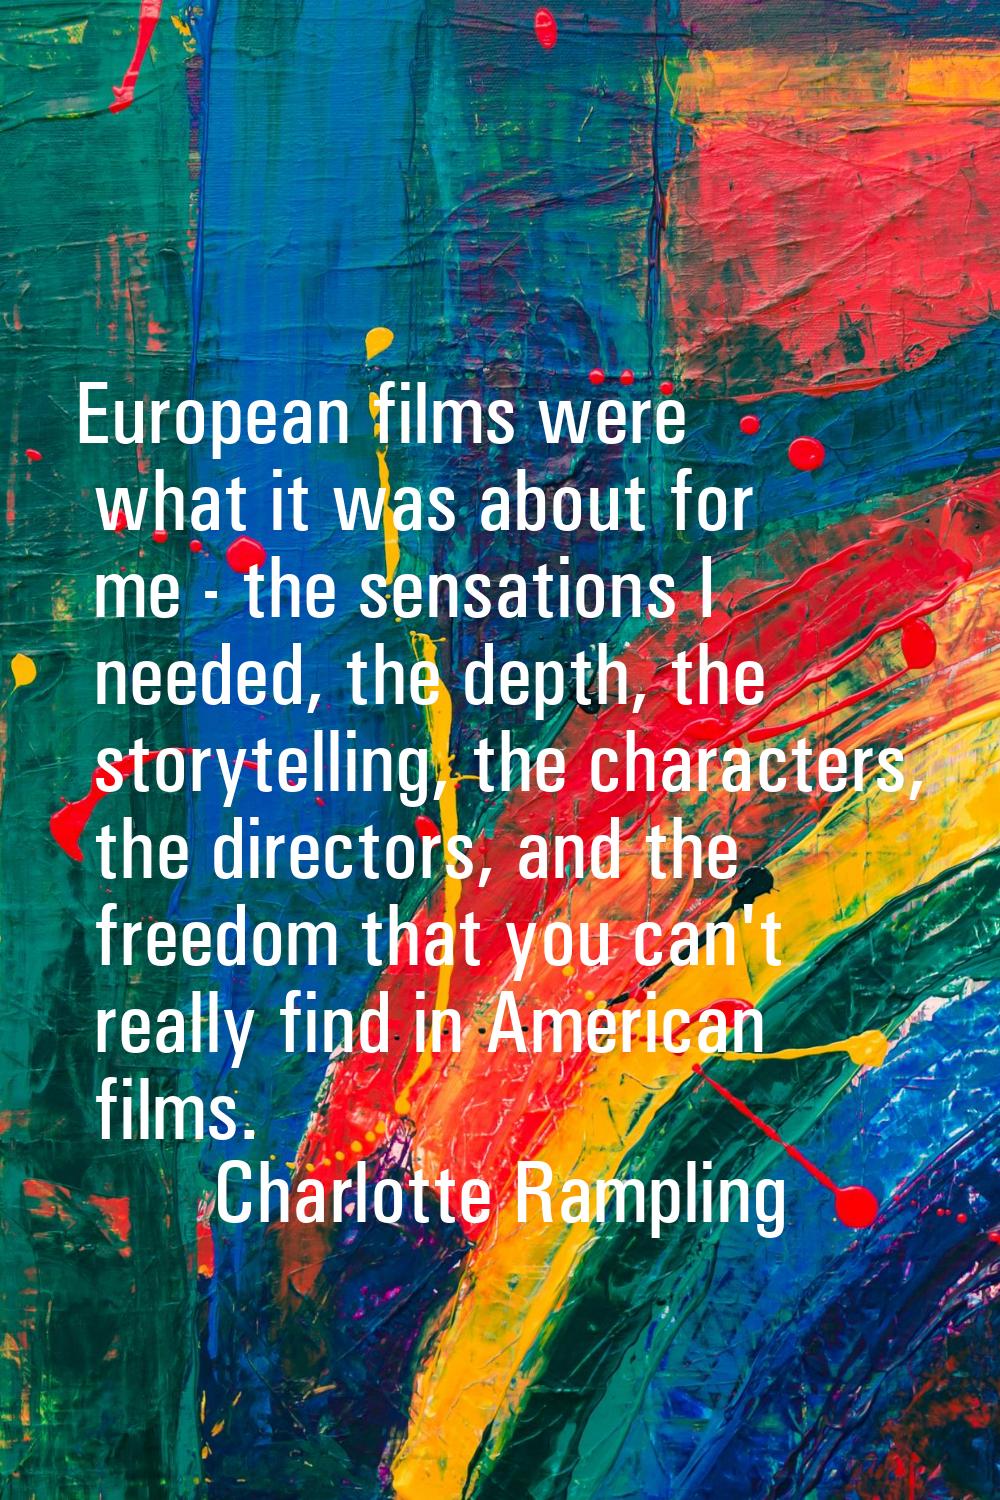 European films were what it was about for me - the sensations I needed, the depth, the storytelling